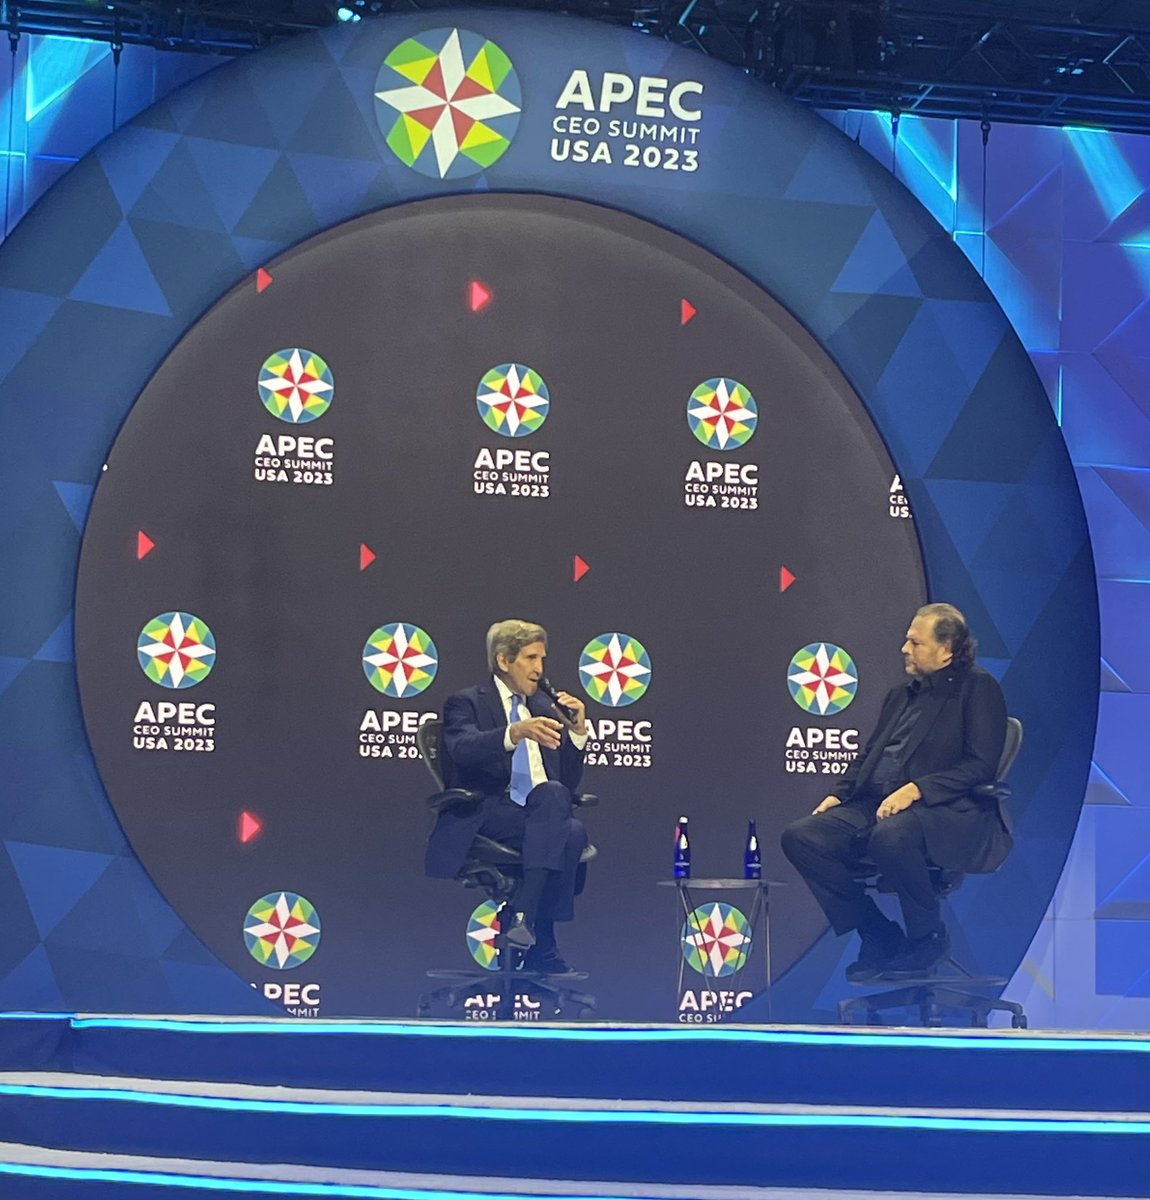 Our City is at the heart of what’s happening in AI, which is changing the world and transforming lives. It was amazing to kick off conversations at APEC about the future of AI from @laurenepowell, @sama, Chris Cox, James Minyaki, @benioff and John Kerry.